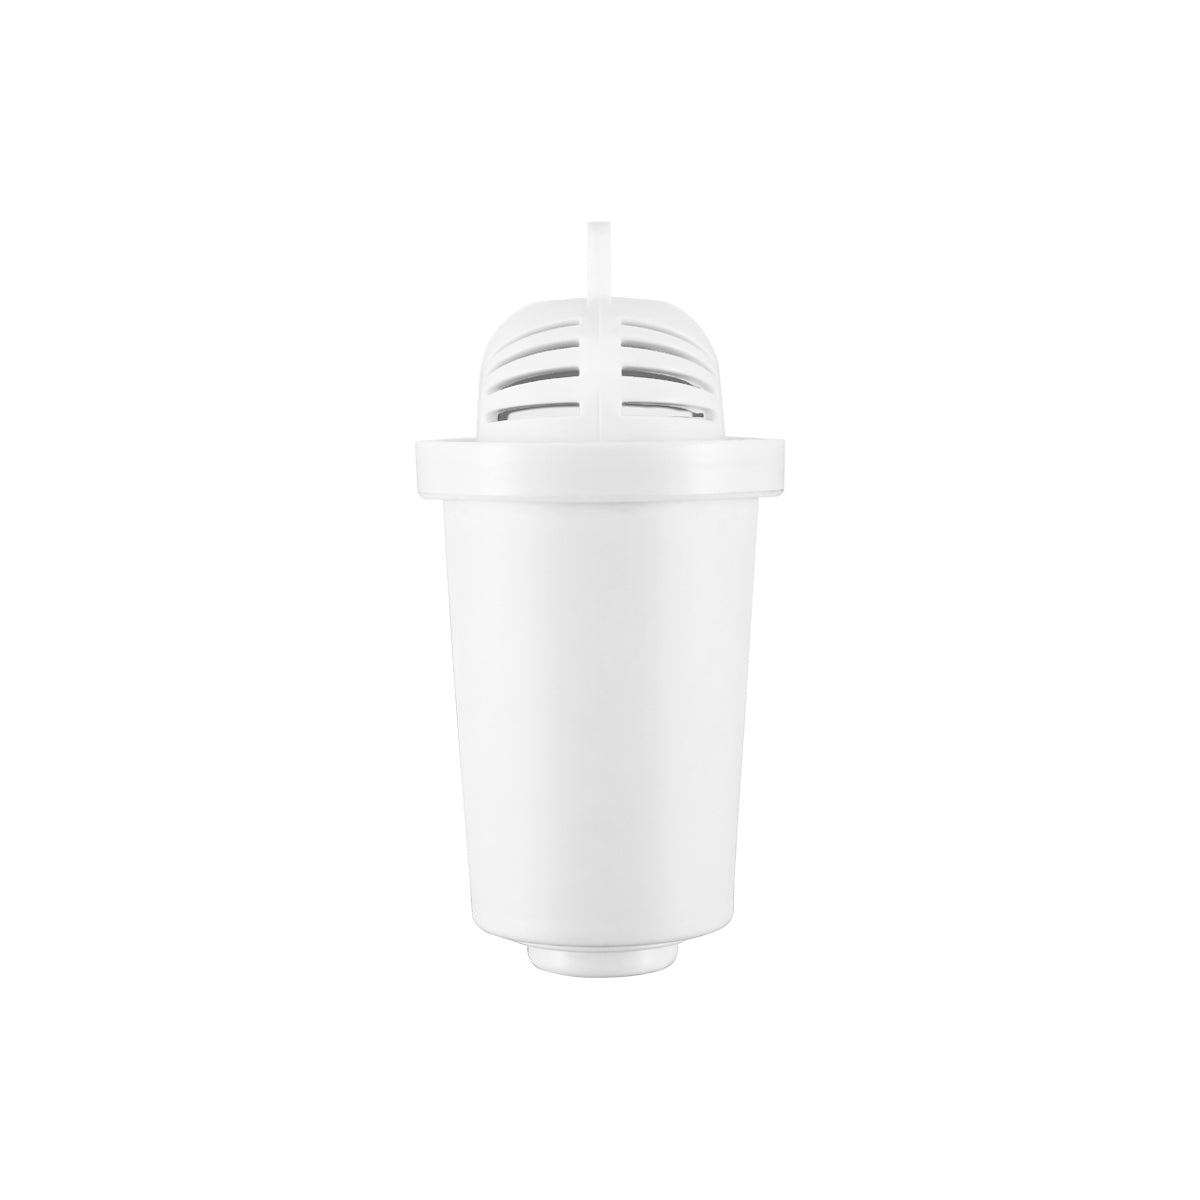 Midea Water Filter for 3.5L Water Filter Jug